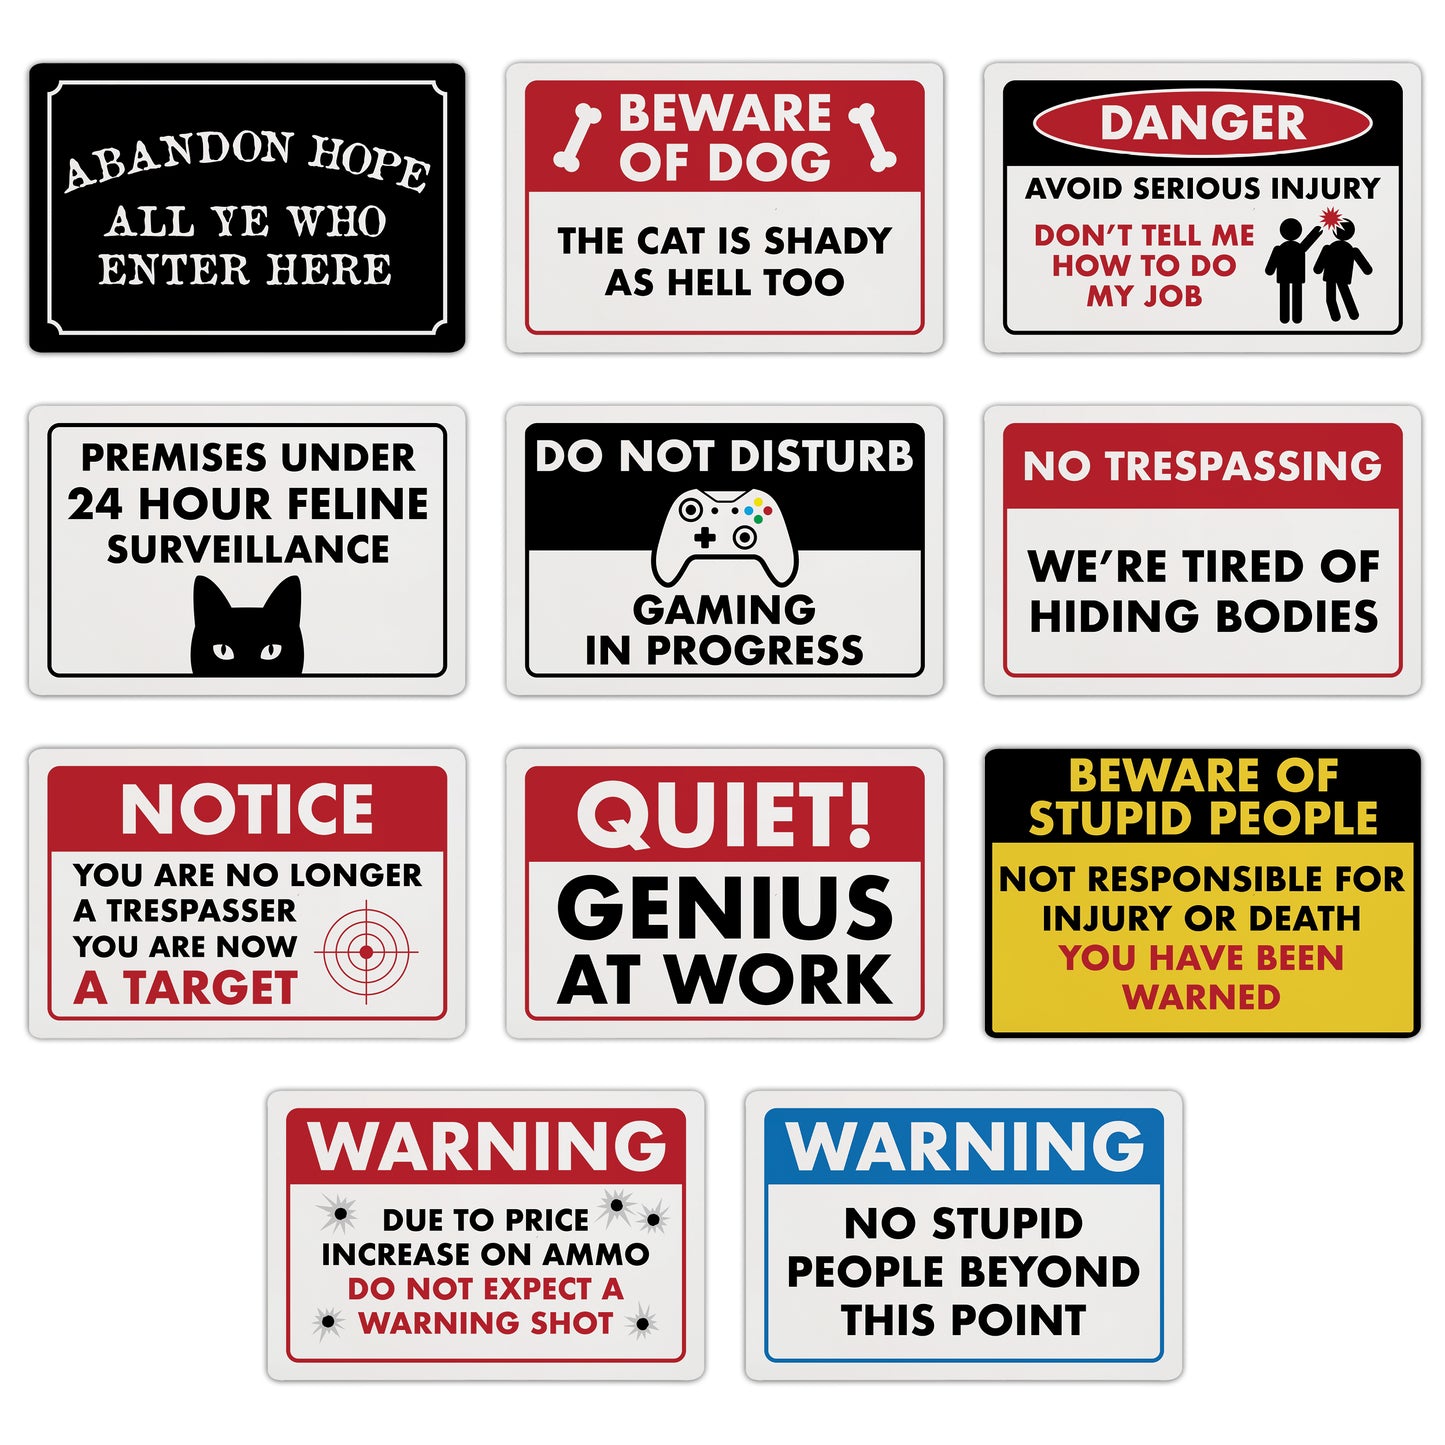 Warning - No Stupid People Beyond This Point - 8" x 12" Funny Plastic (PVC) Sign